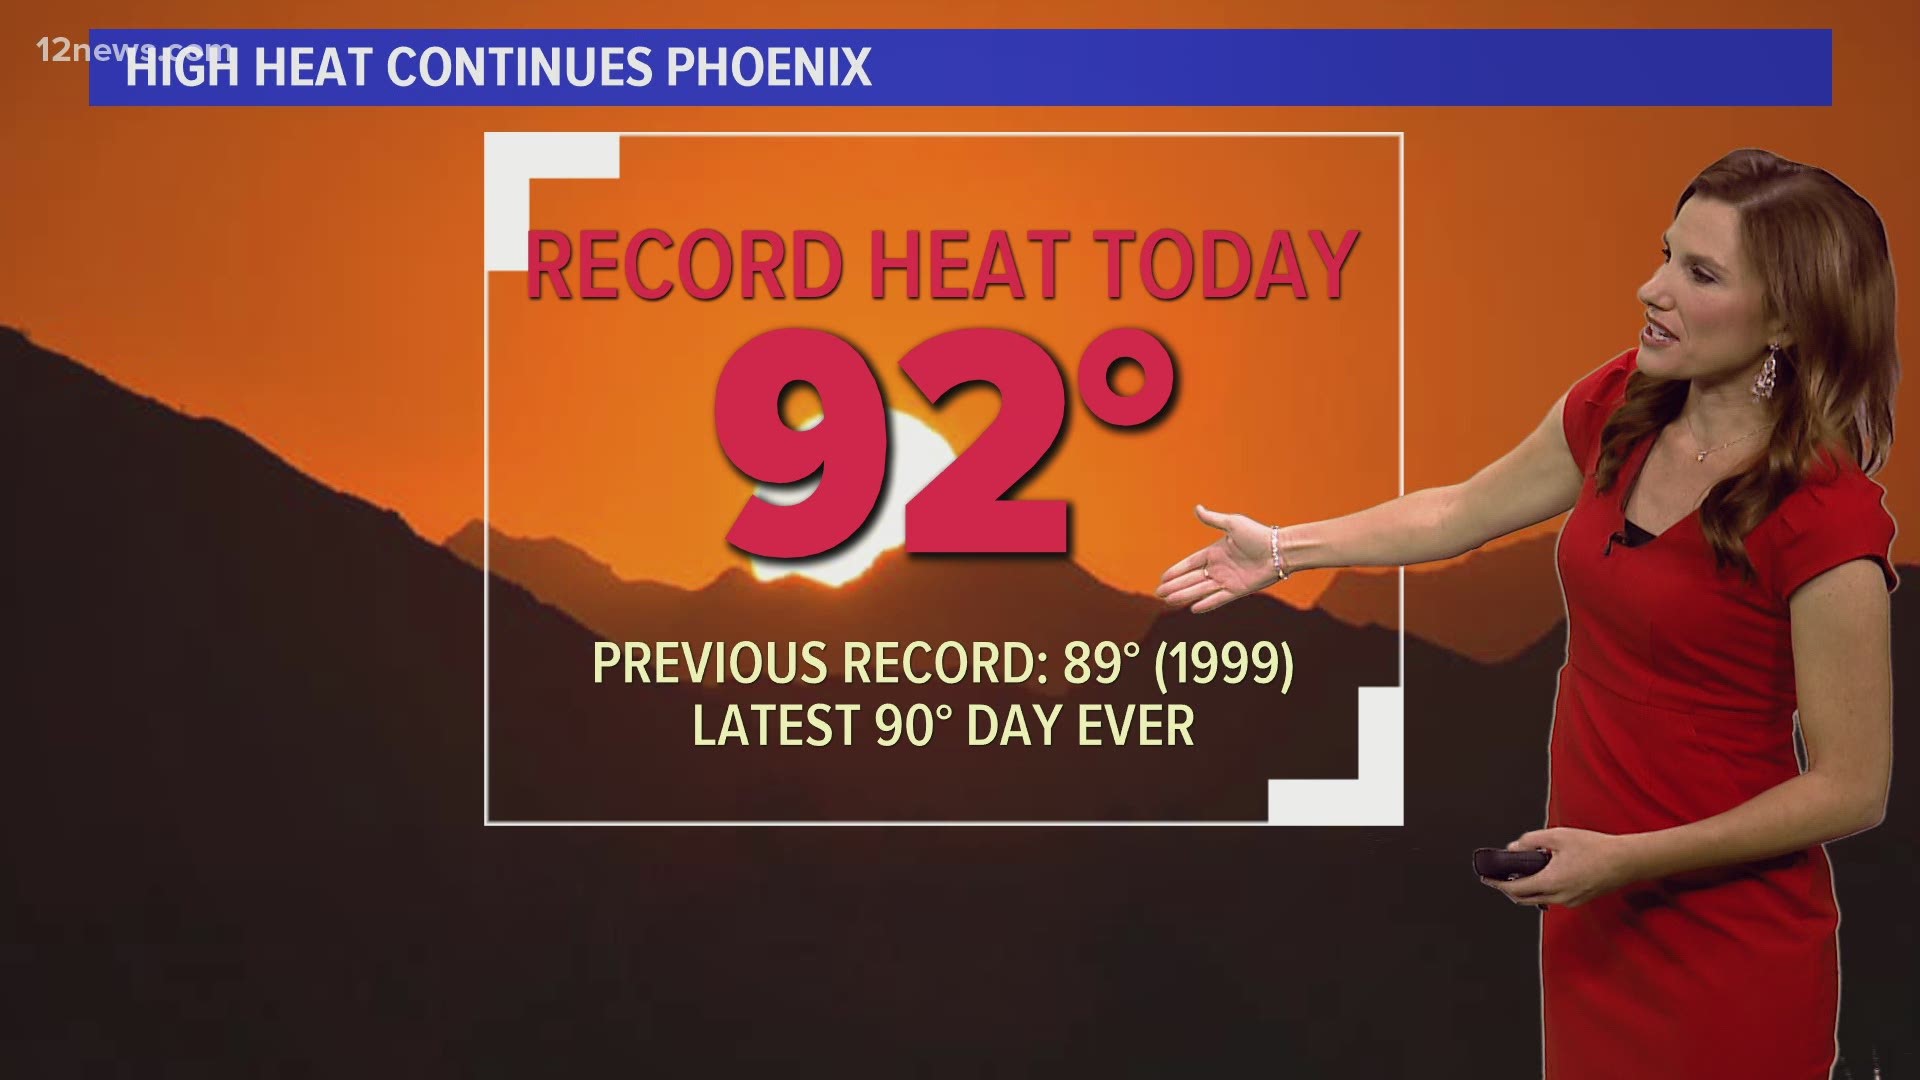 Sky Harbor International Airport recorded a high of 90 degrees Monday afternoon; it’s the latest a temperature that high has been recorded in city history.